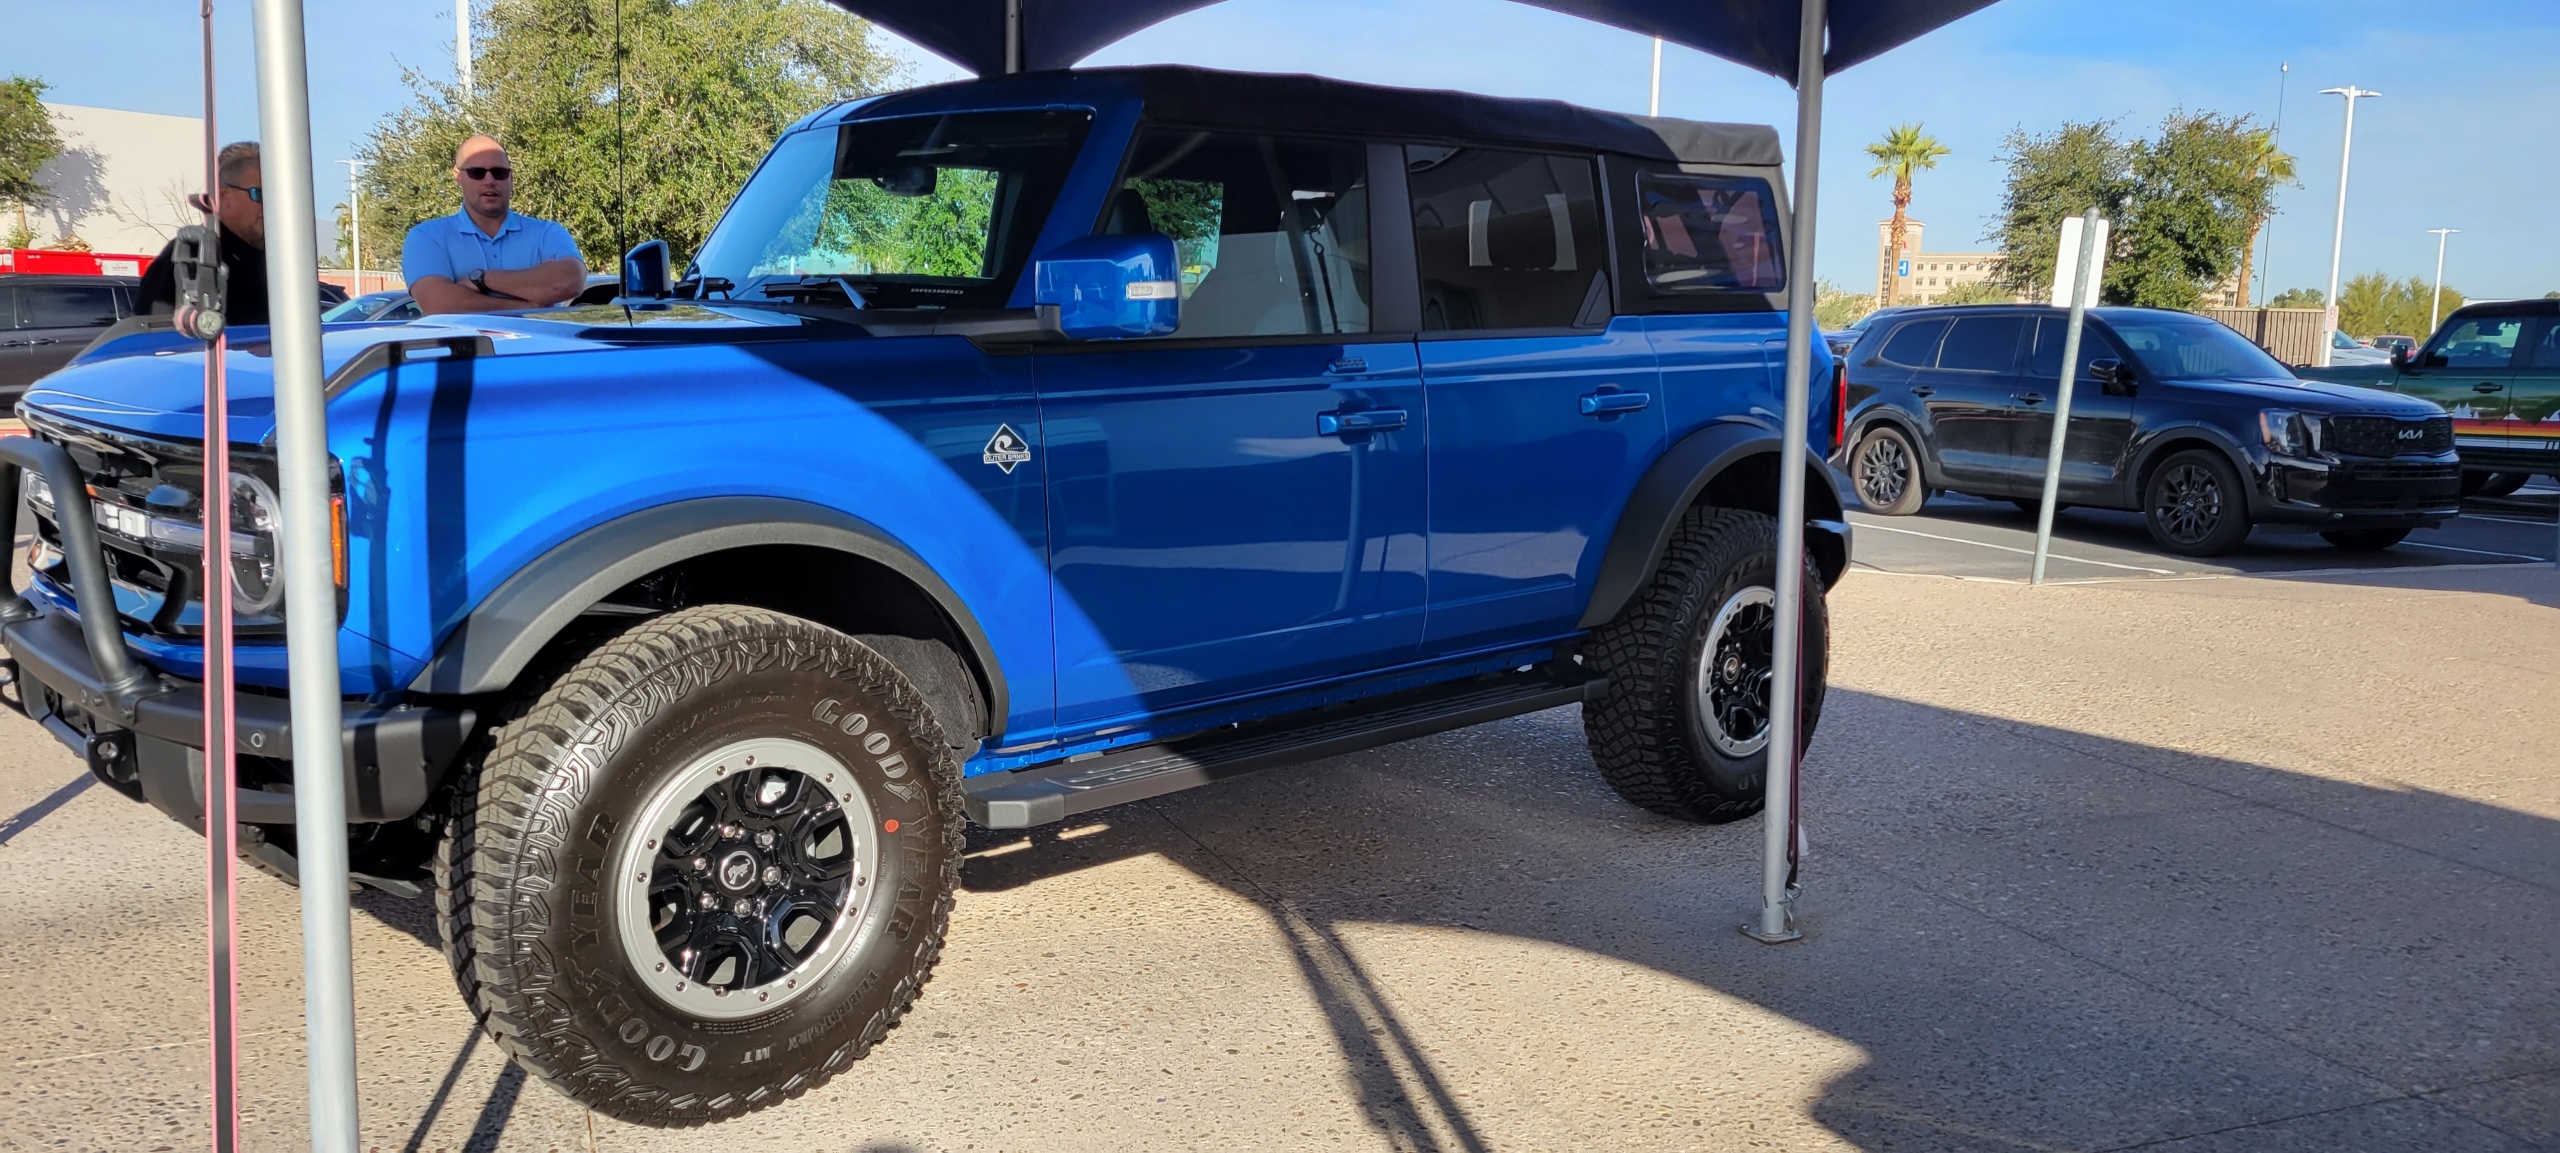 Ford Bronco Before & After Photos. Let's See Your Bronco! _storage_emulated_0_Download_Resized_20221122_093752